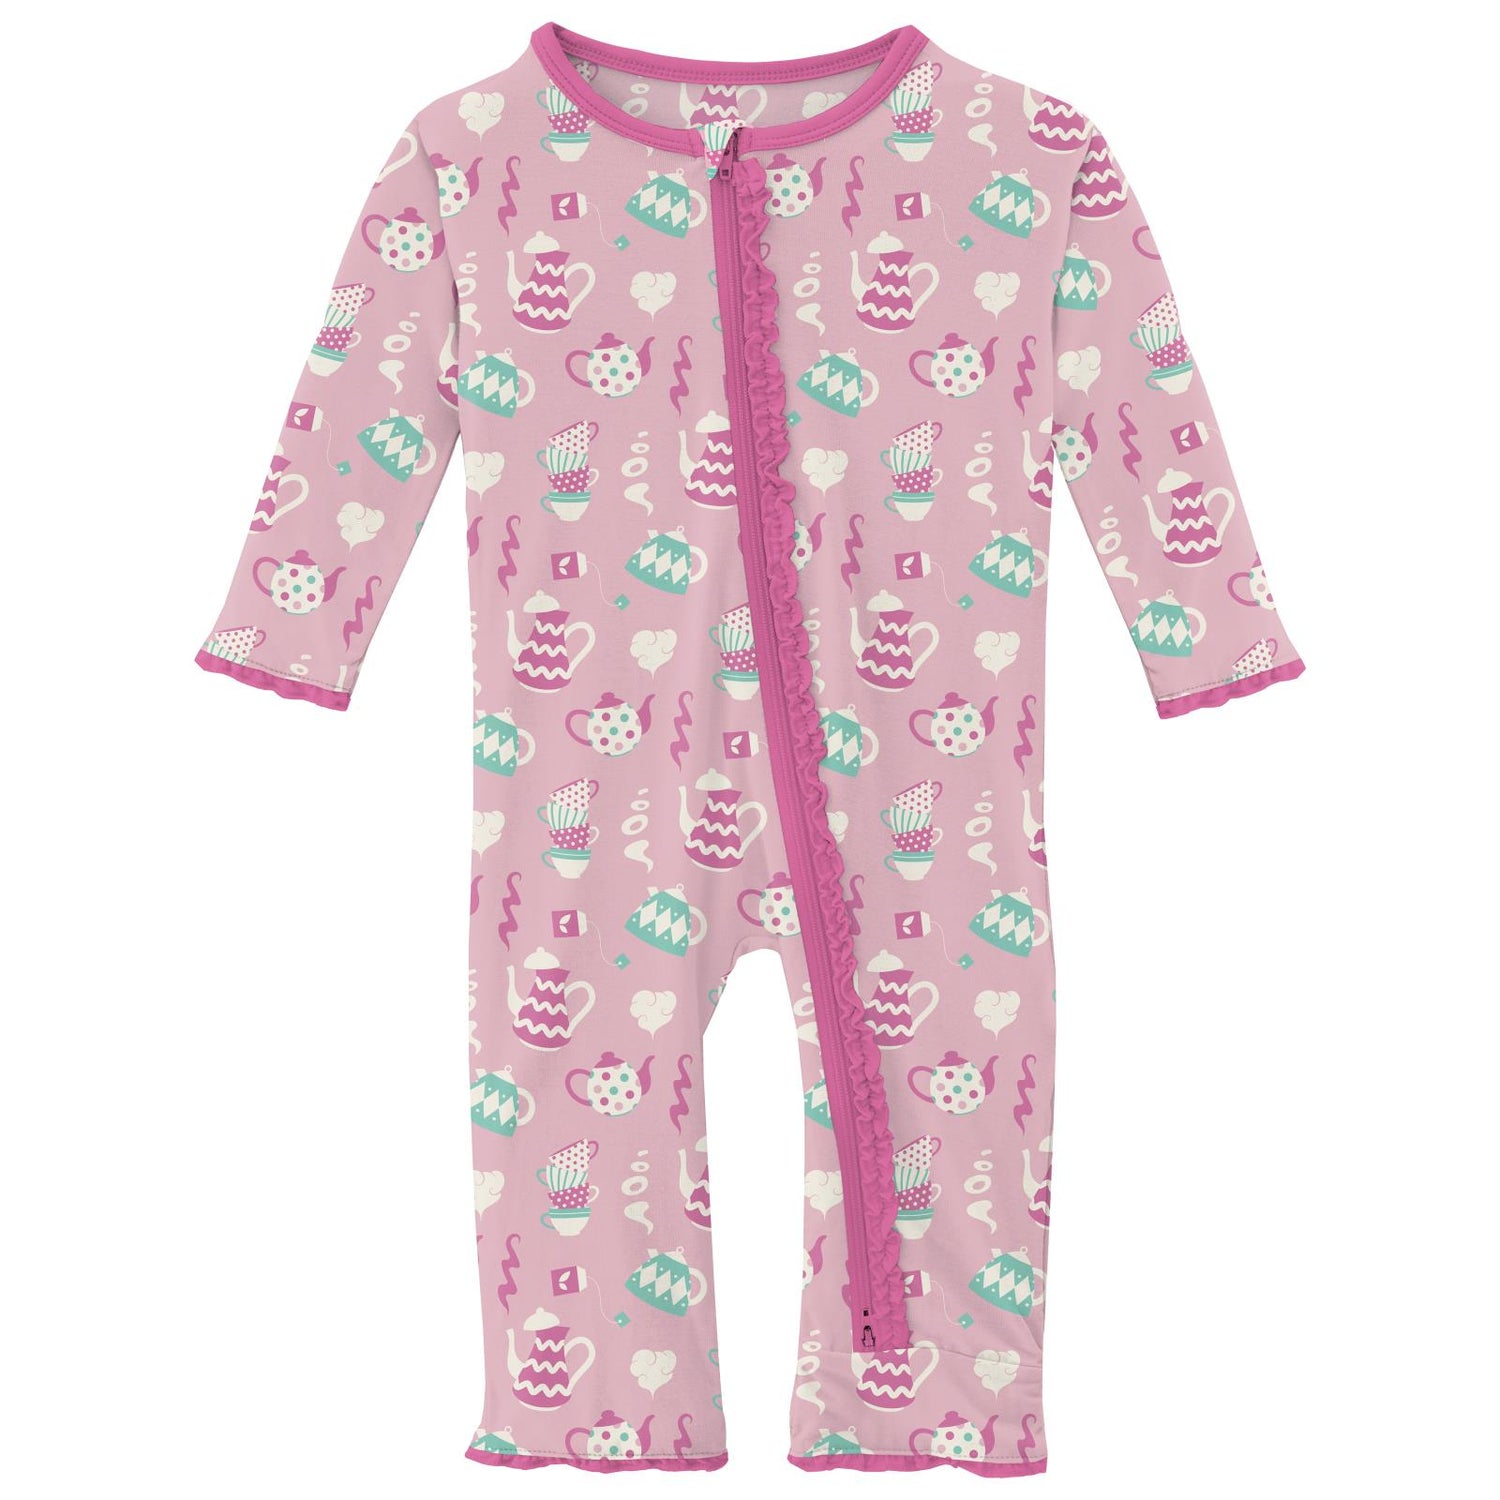 Print Muffin Ruffle Coverall with 2 Way Zipper in Cake Pop Tea Party